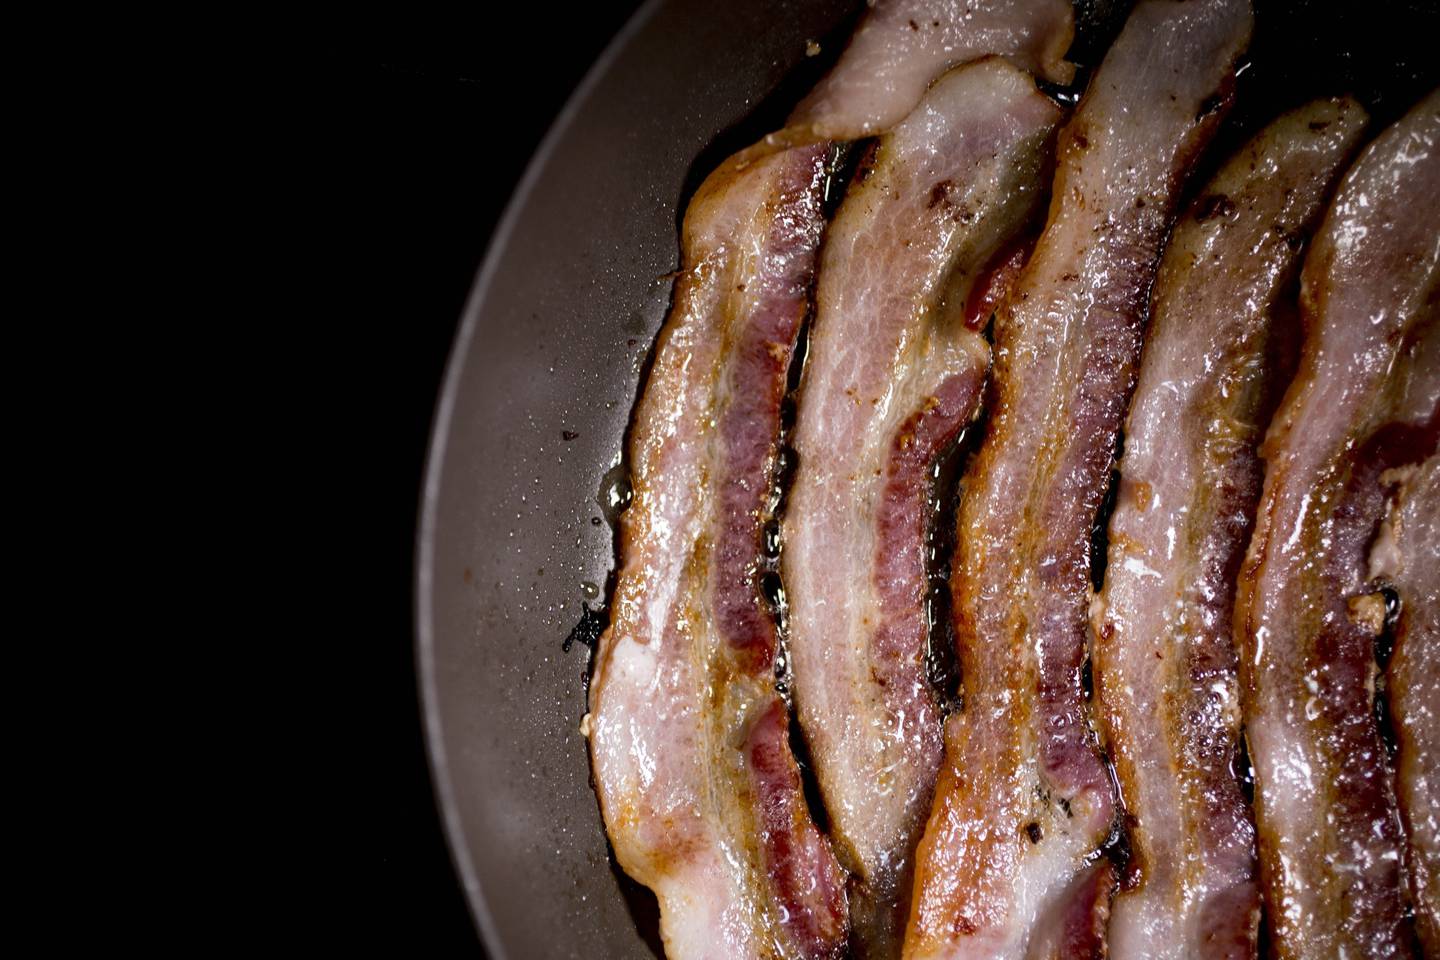 In the US, prices of bacon, chicken breasts and ground beef have never been higher.dfd